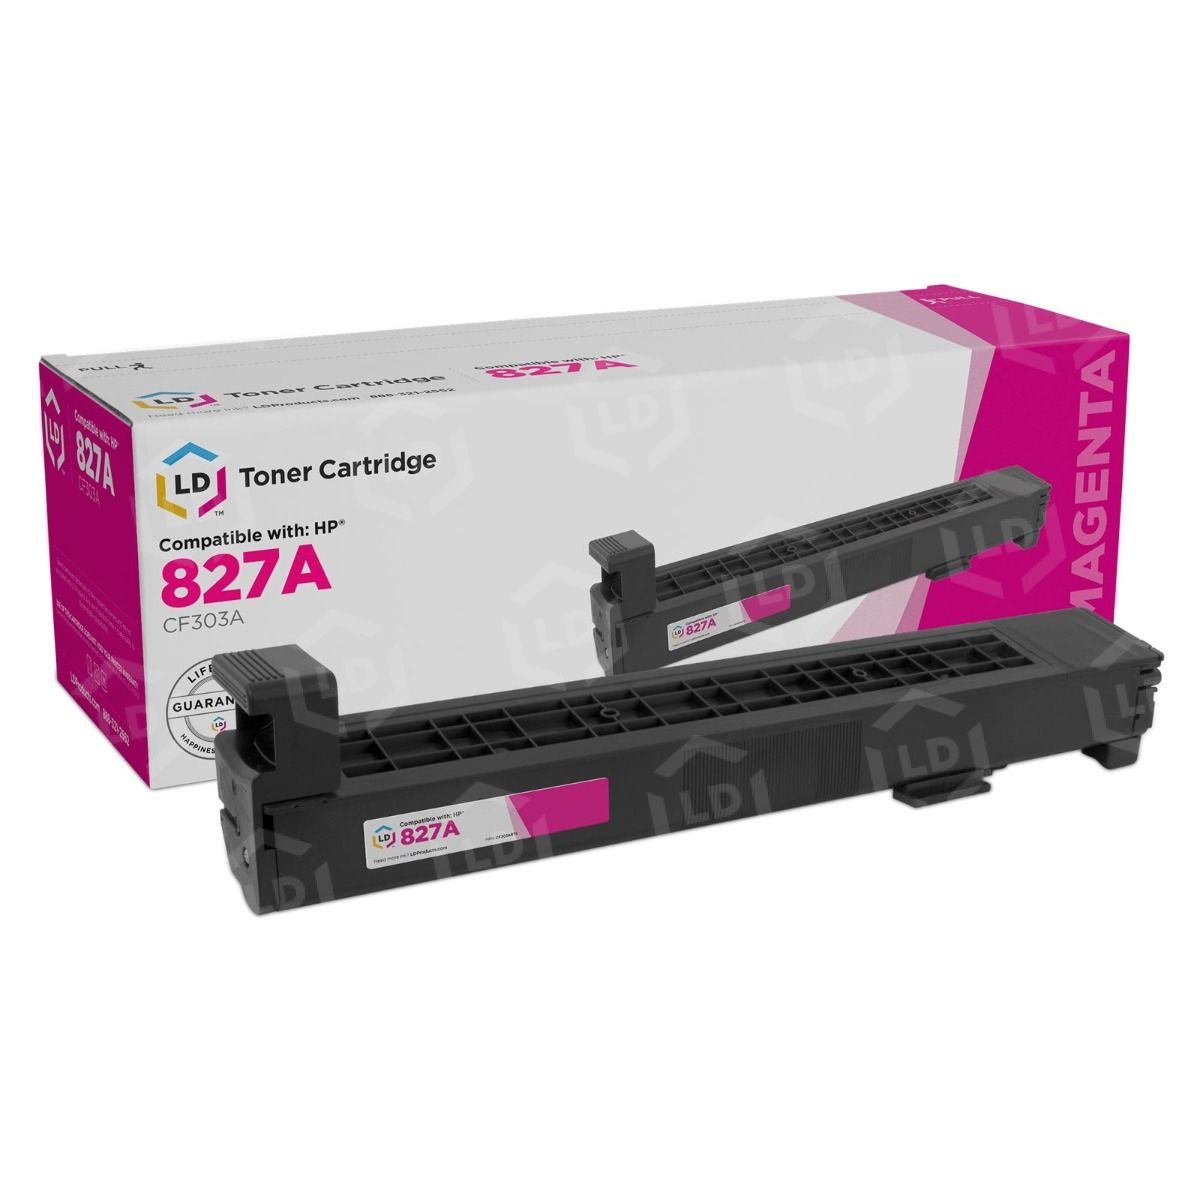 HP 827A Magenta Toner CF303A Low Prices All Colors LD Products